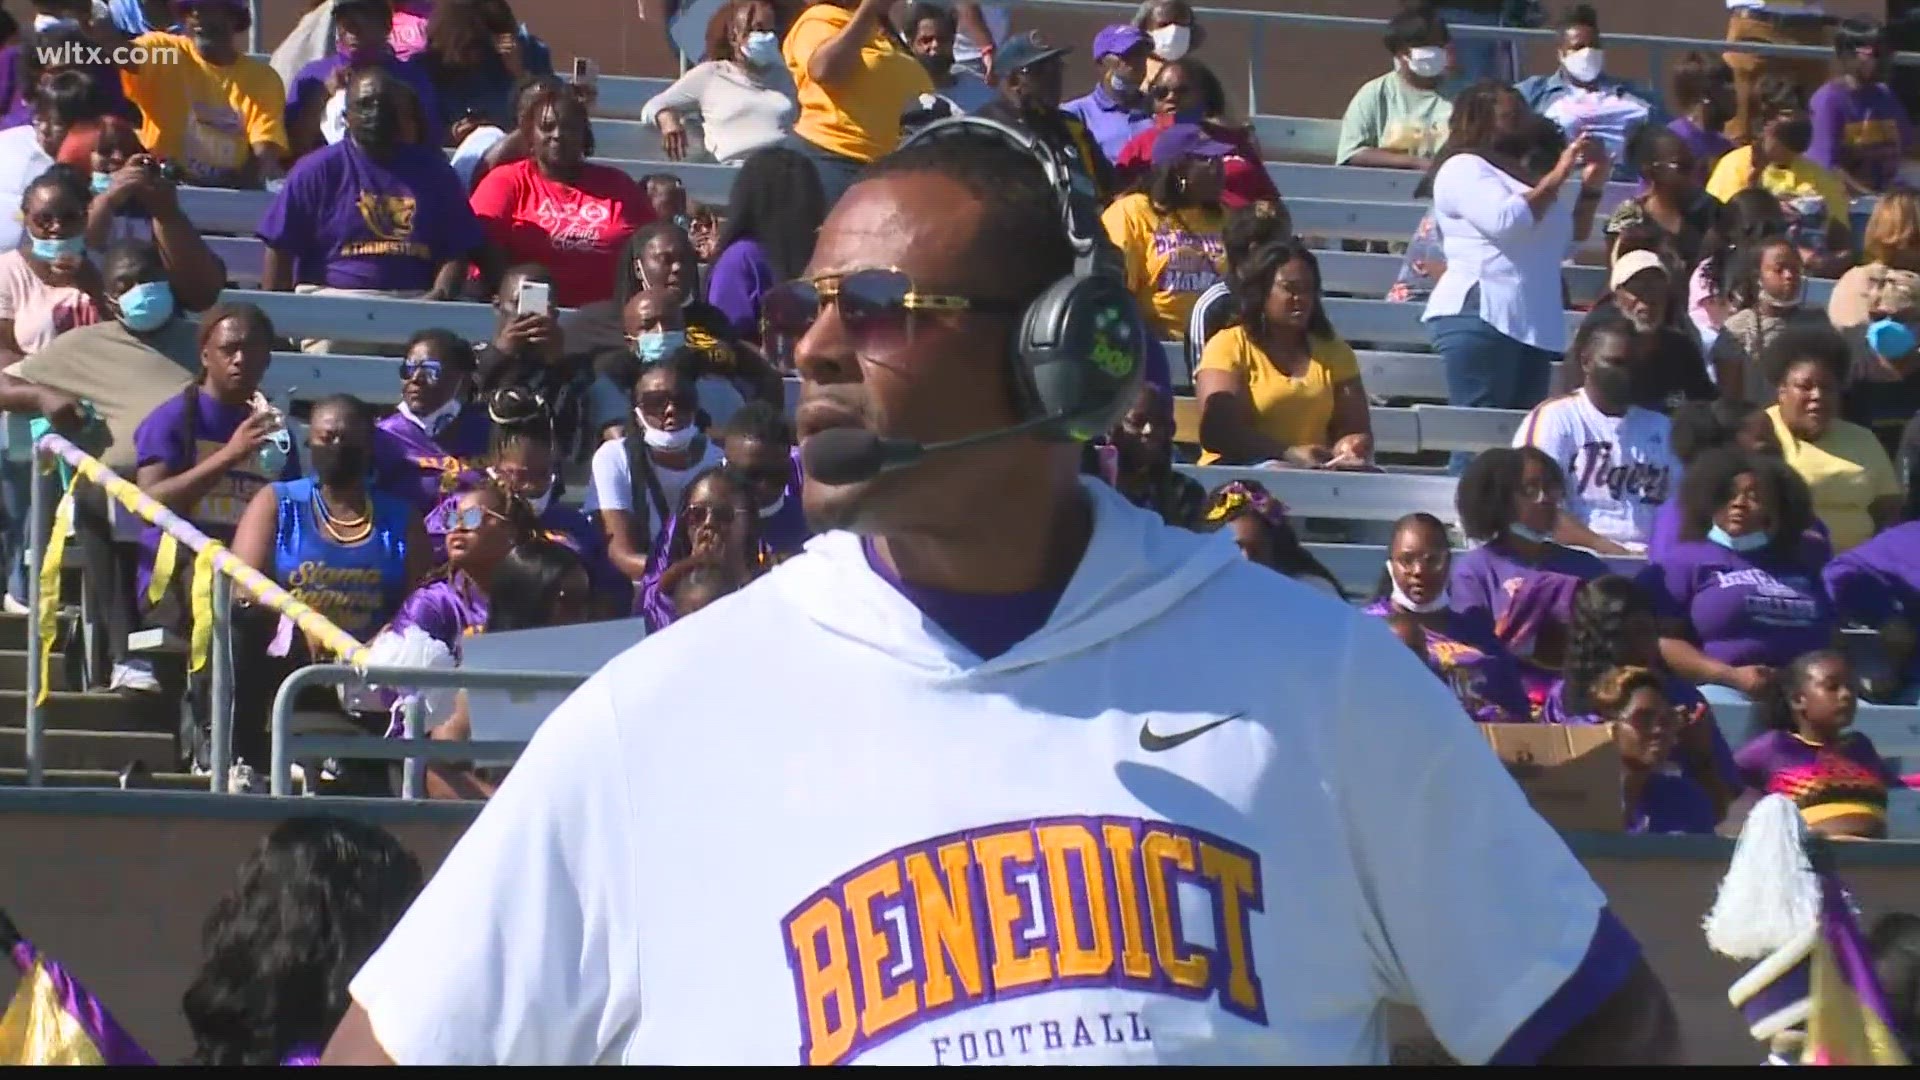 Chennis Berry comes to SC State off the heels of back-to-back 11-win seasons at Benedict College.